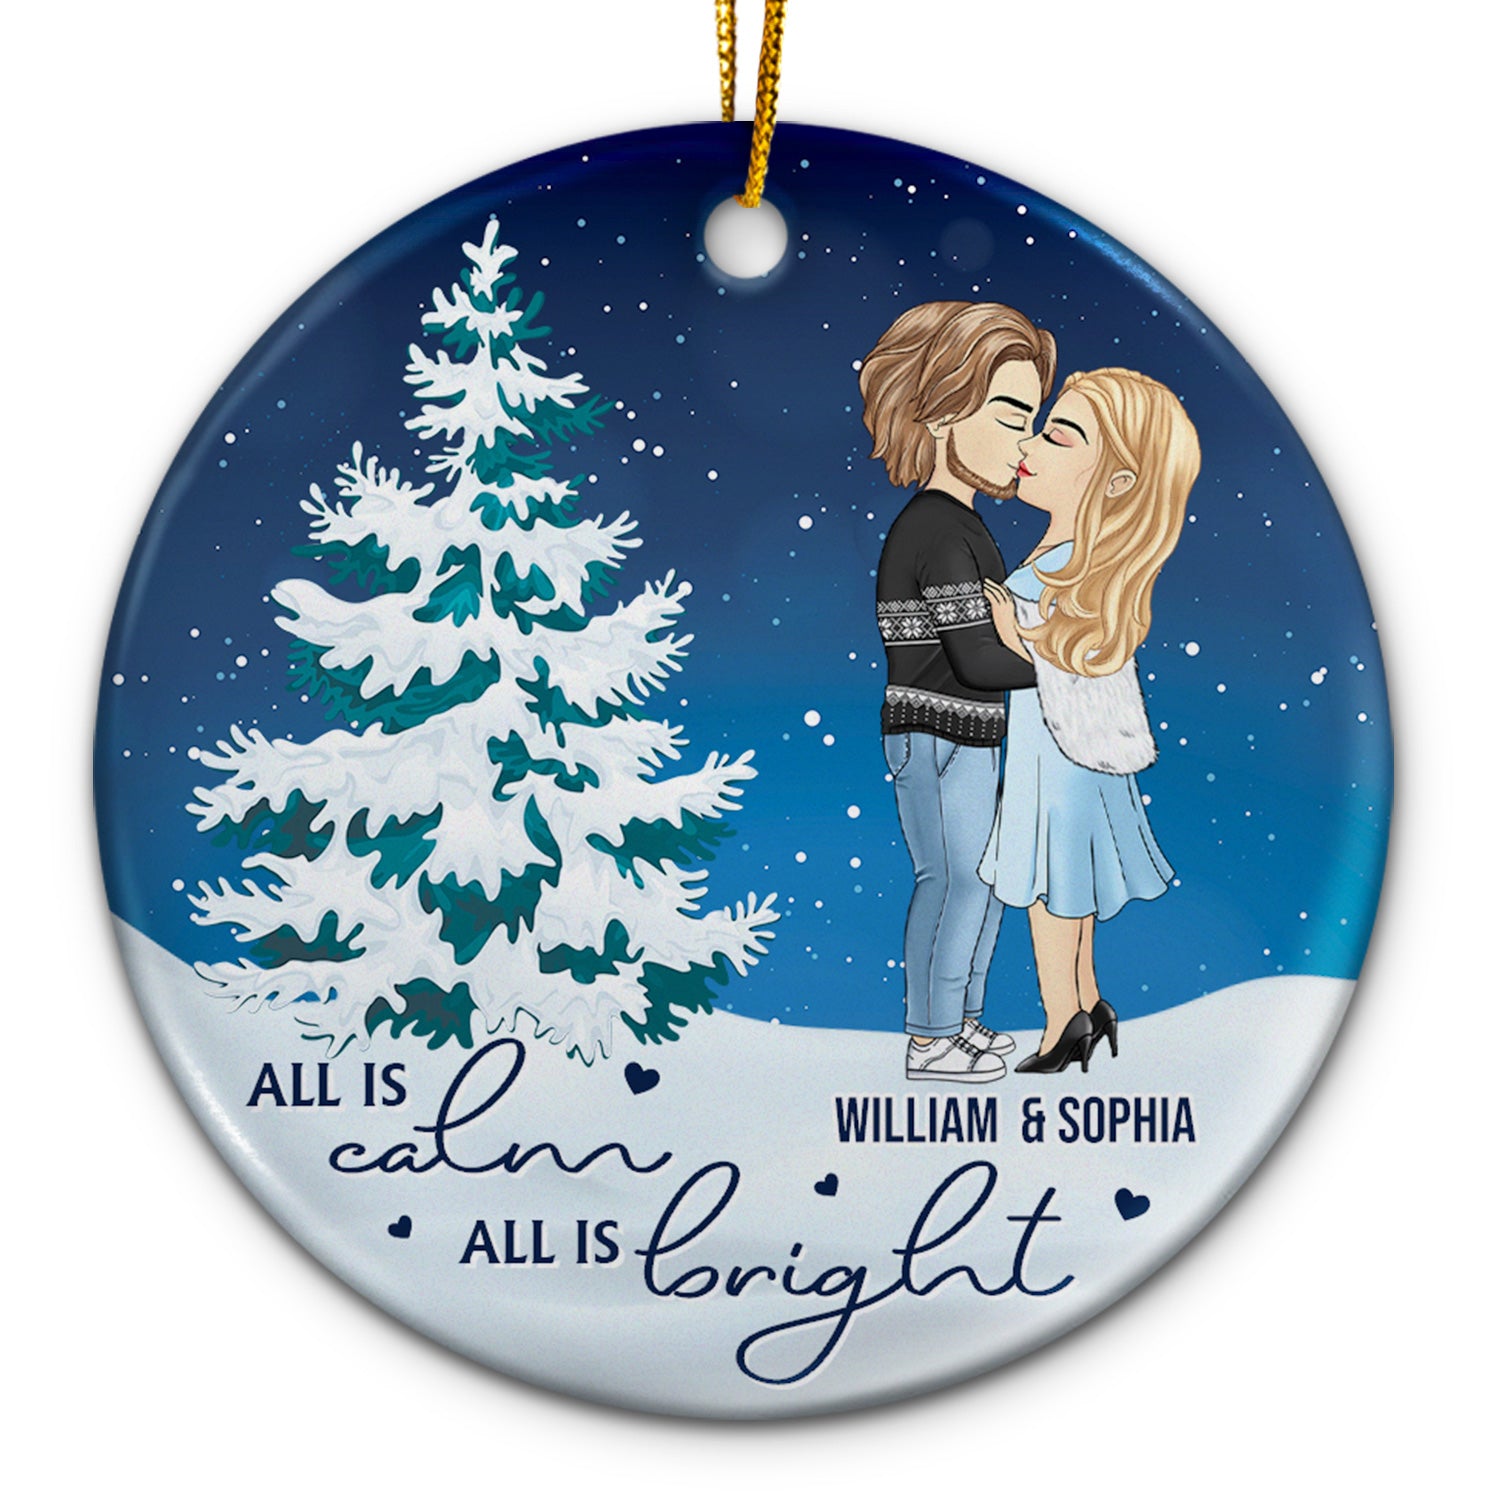 All Is Calm All Is Bright - Christmas Gift For Couple, Spouse, Husband, Wife - Personalized Circle Ceramic Ornament